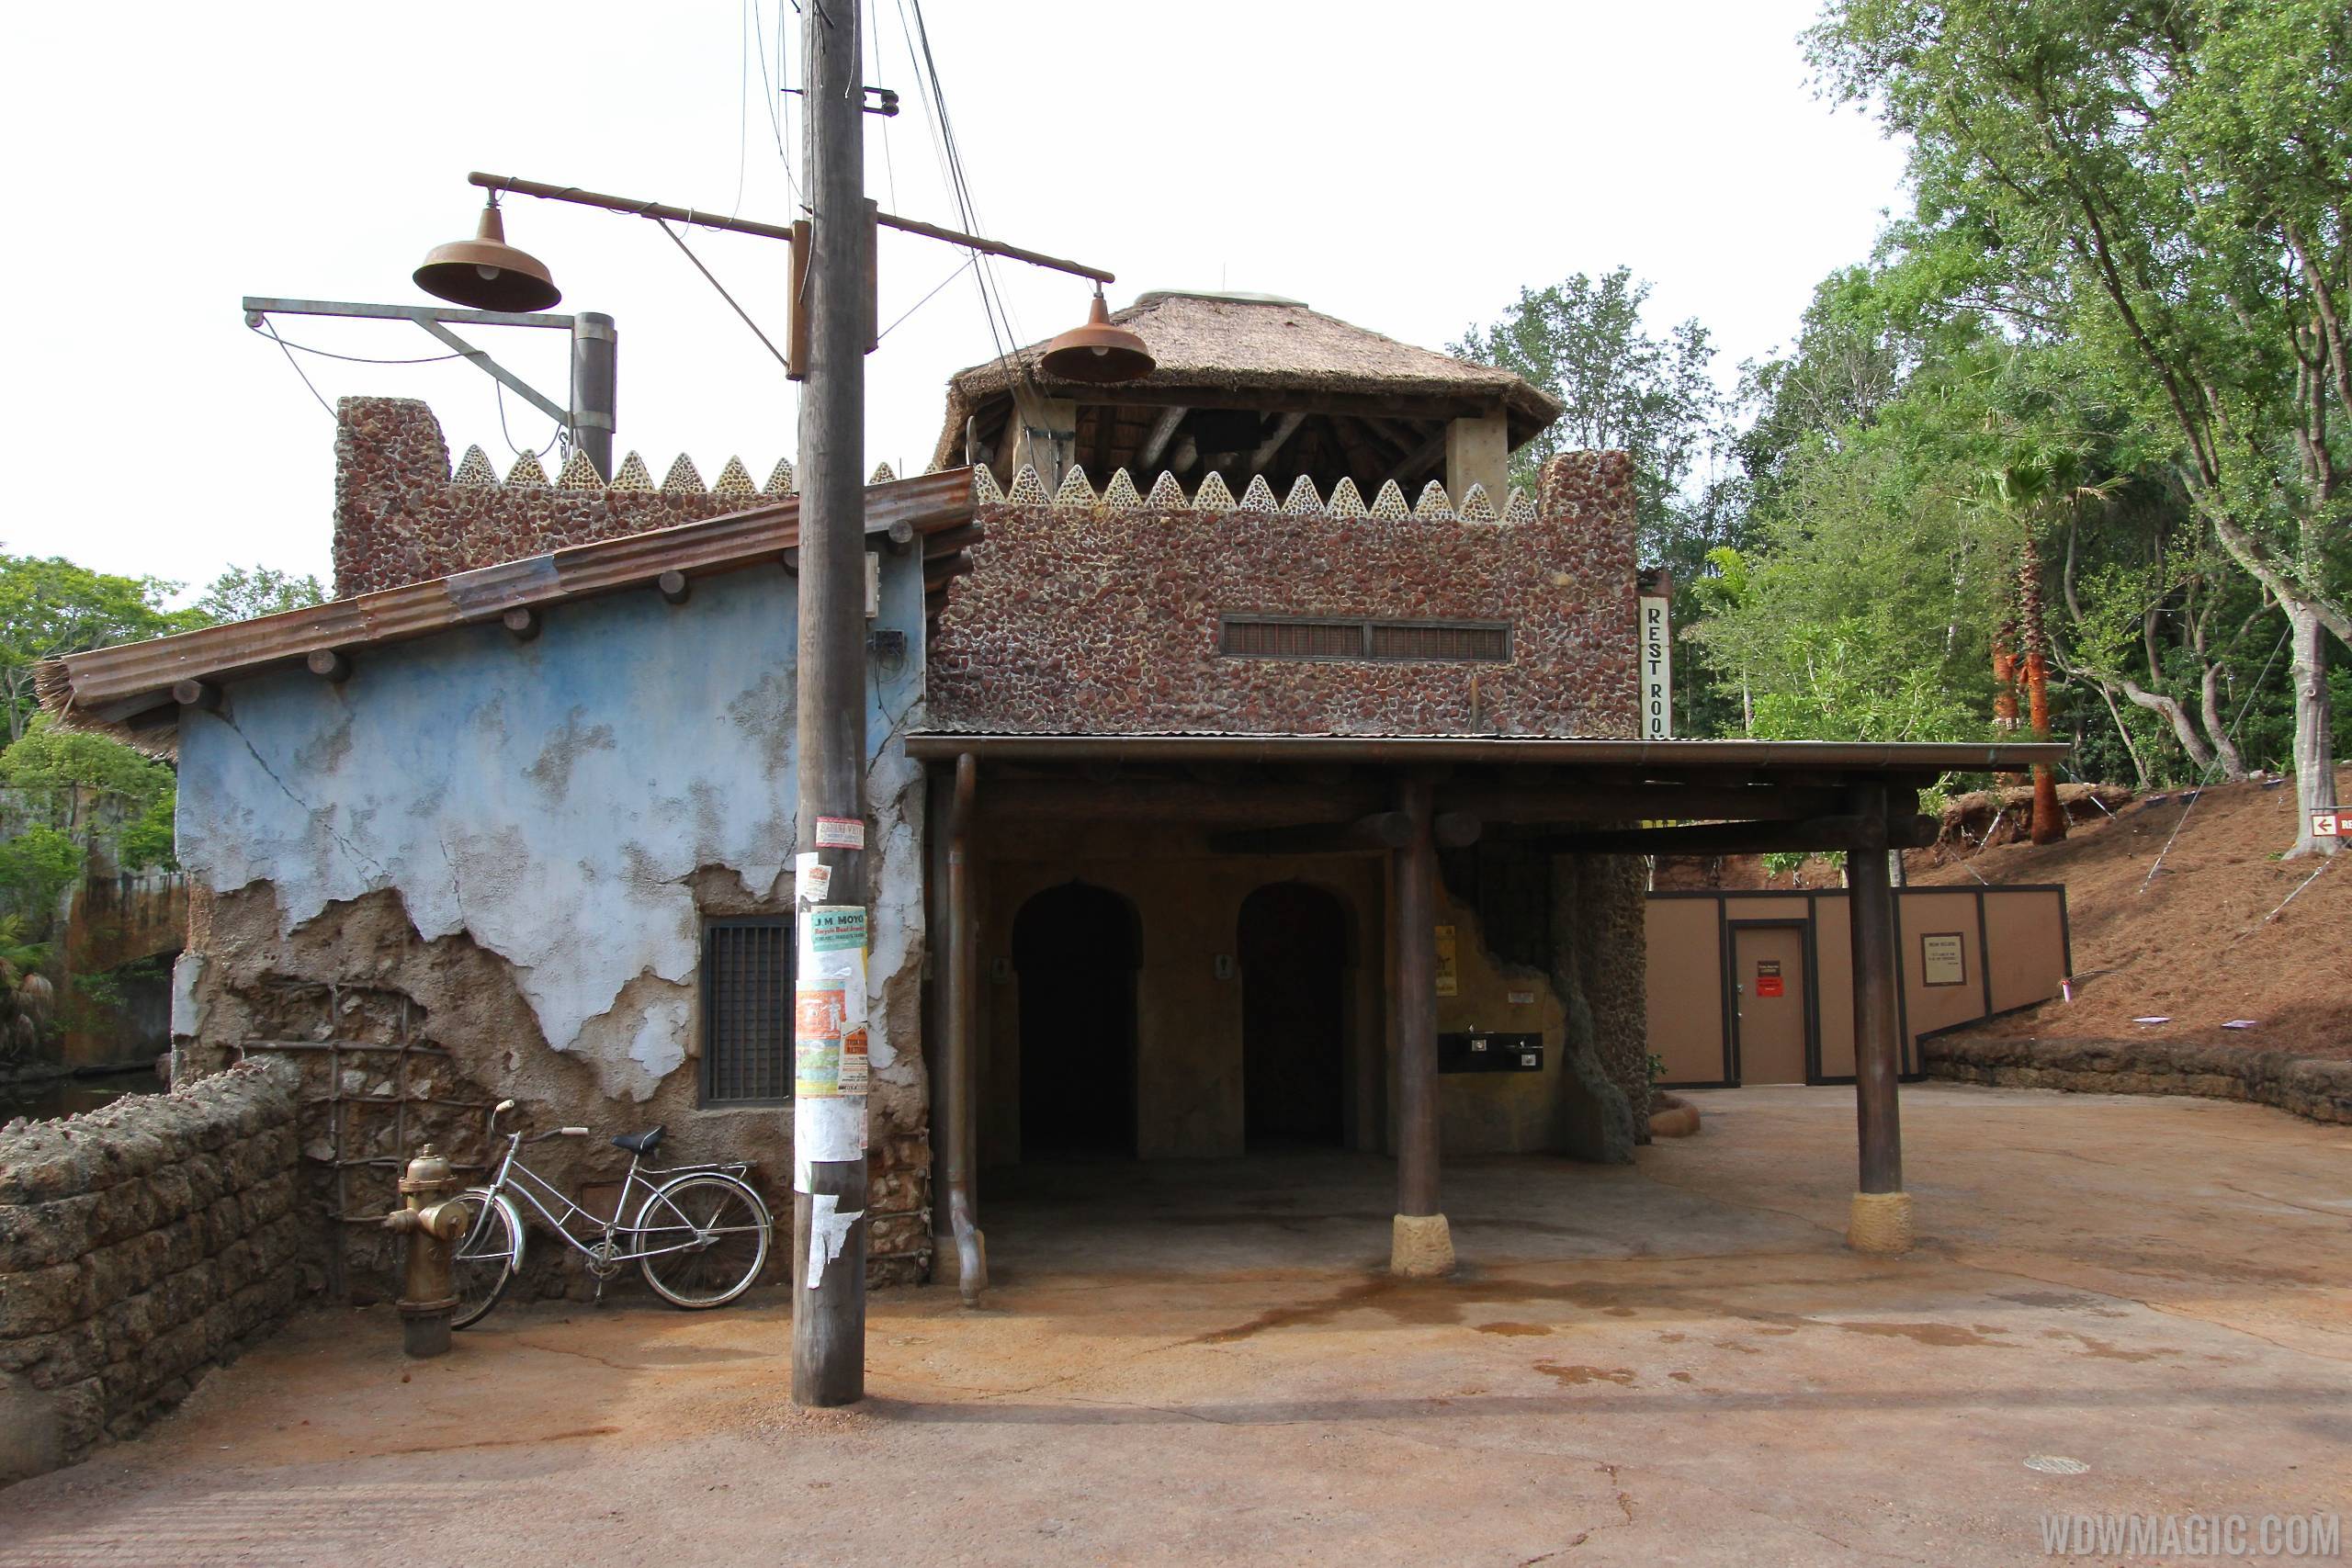 PHOTOS and VIDEO - Take a walkthrough of the new Harambe Theatre area at Disney's Animal Kingdom